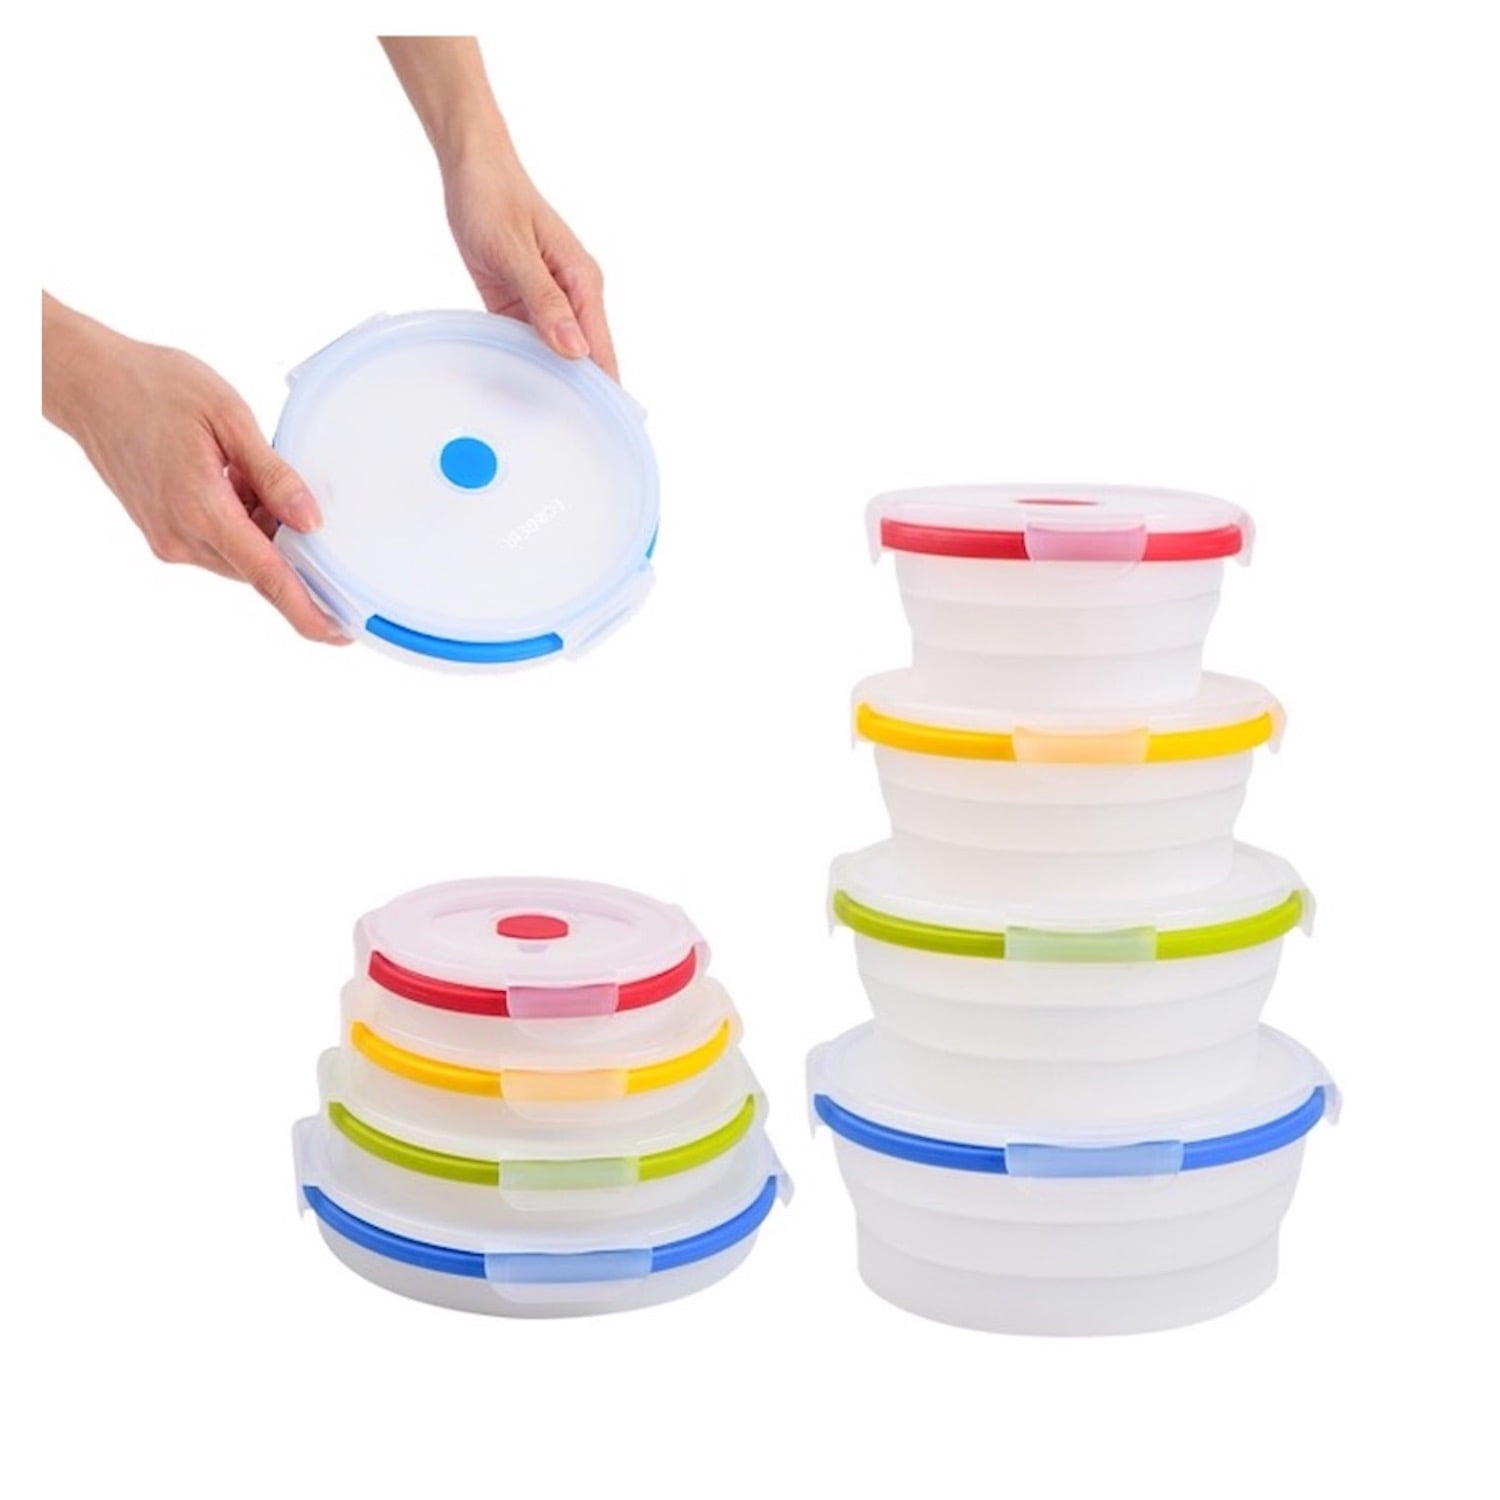  Collapsible Food Storage Containers with Airtight Lid, 4 Sizes,  Annaklin Small and Large Stacking Silicone Collapsible Meal Prep Container  Set for Leftover, Microwave Freezer Dishwasher Safe, Set of 4: Home 